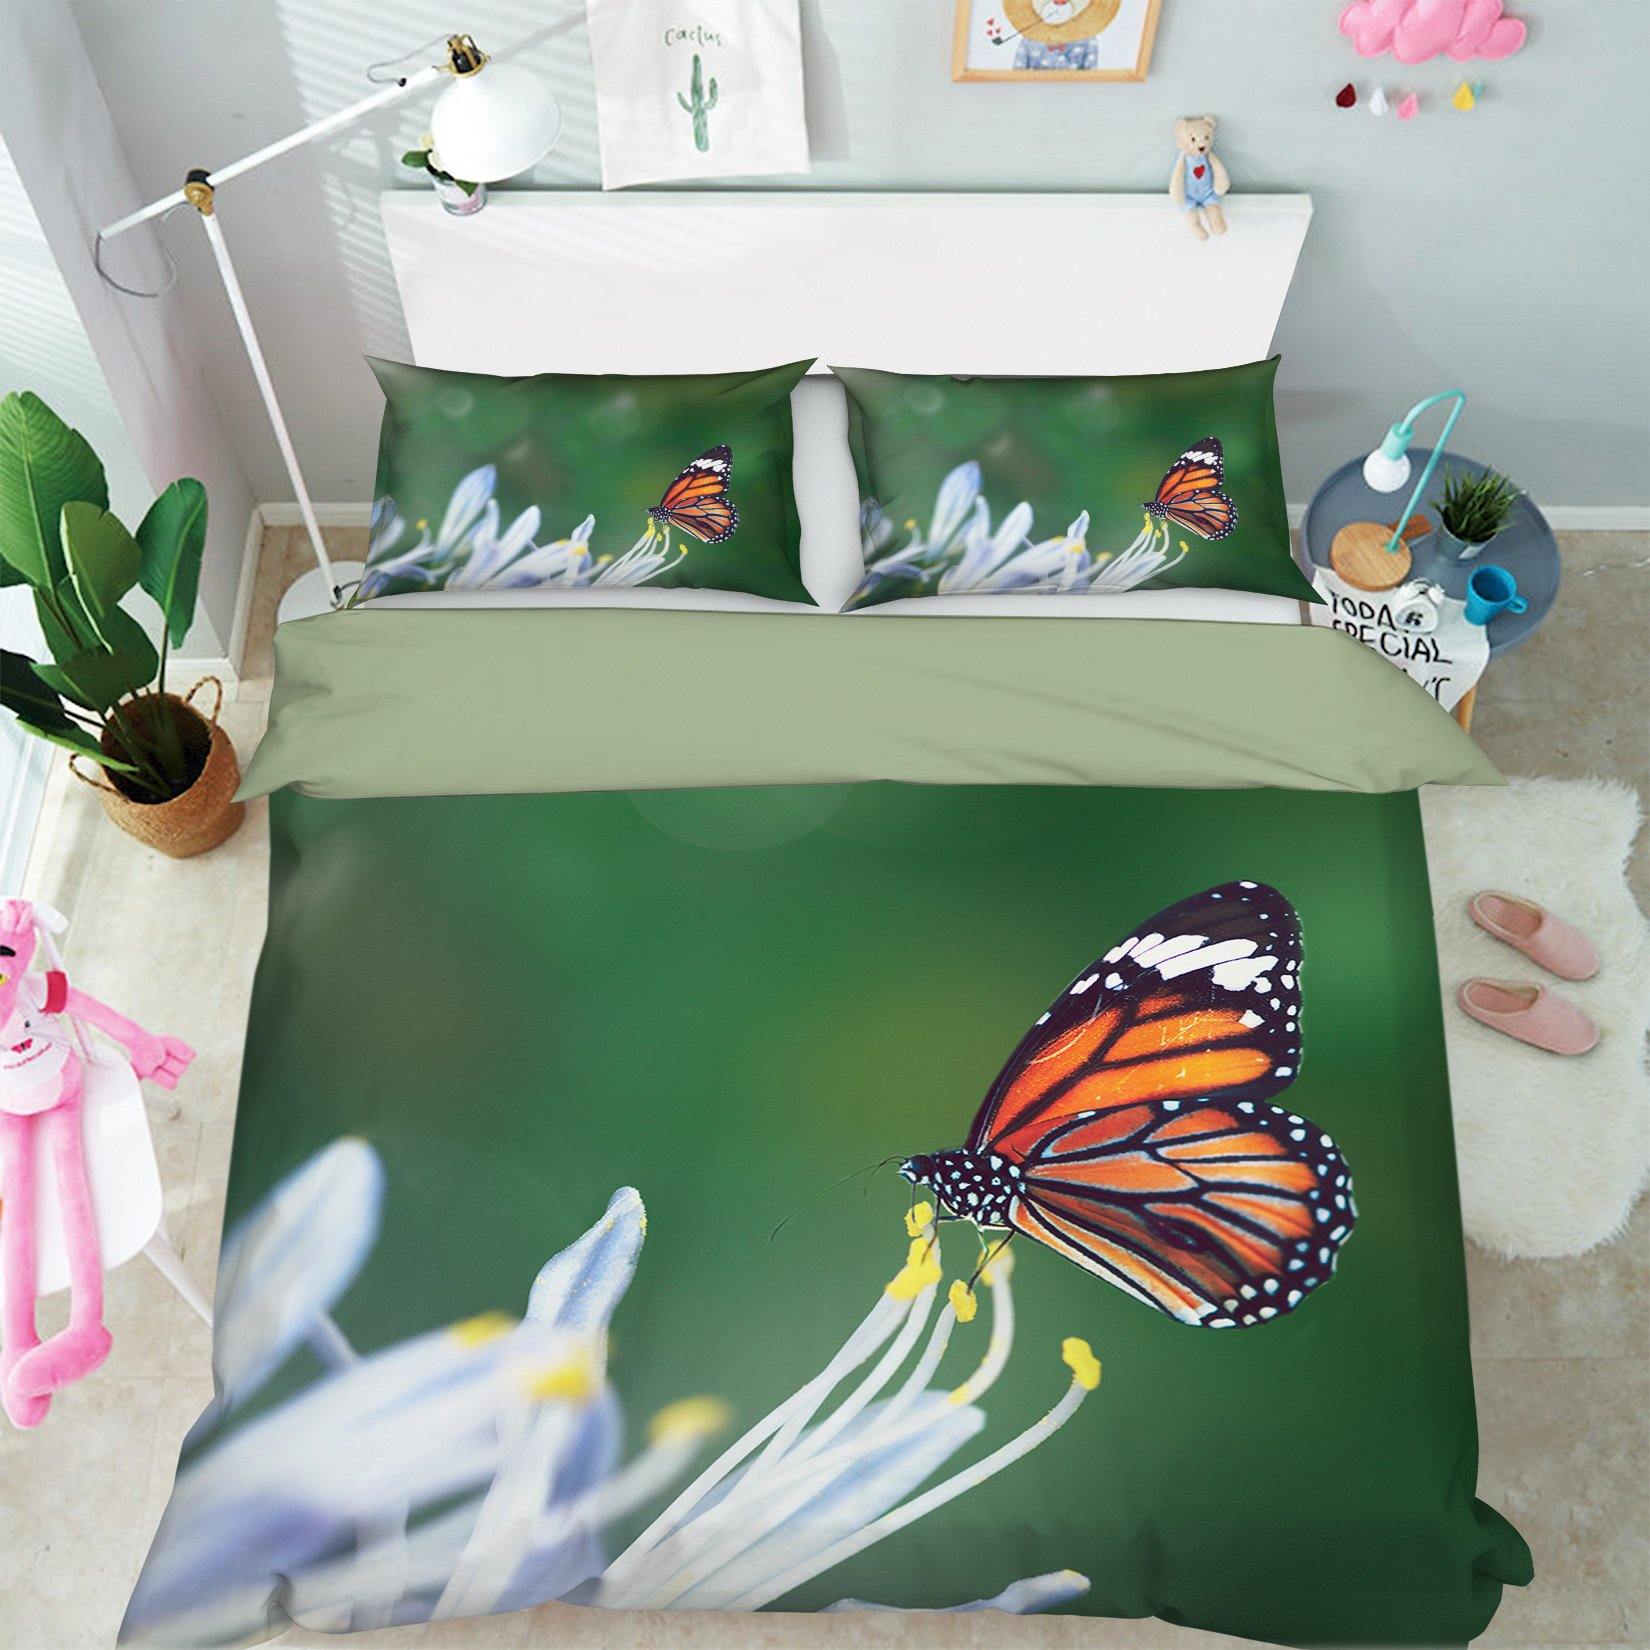 3D Flower Butterfly 1949 Bed Pillowcases Quilt Quiet Covers AJ Creativity Home 